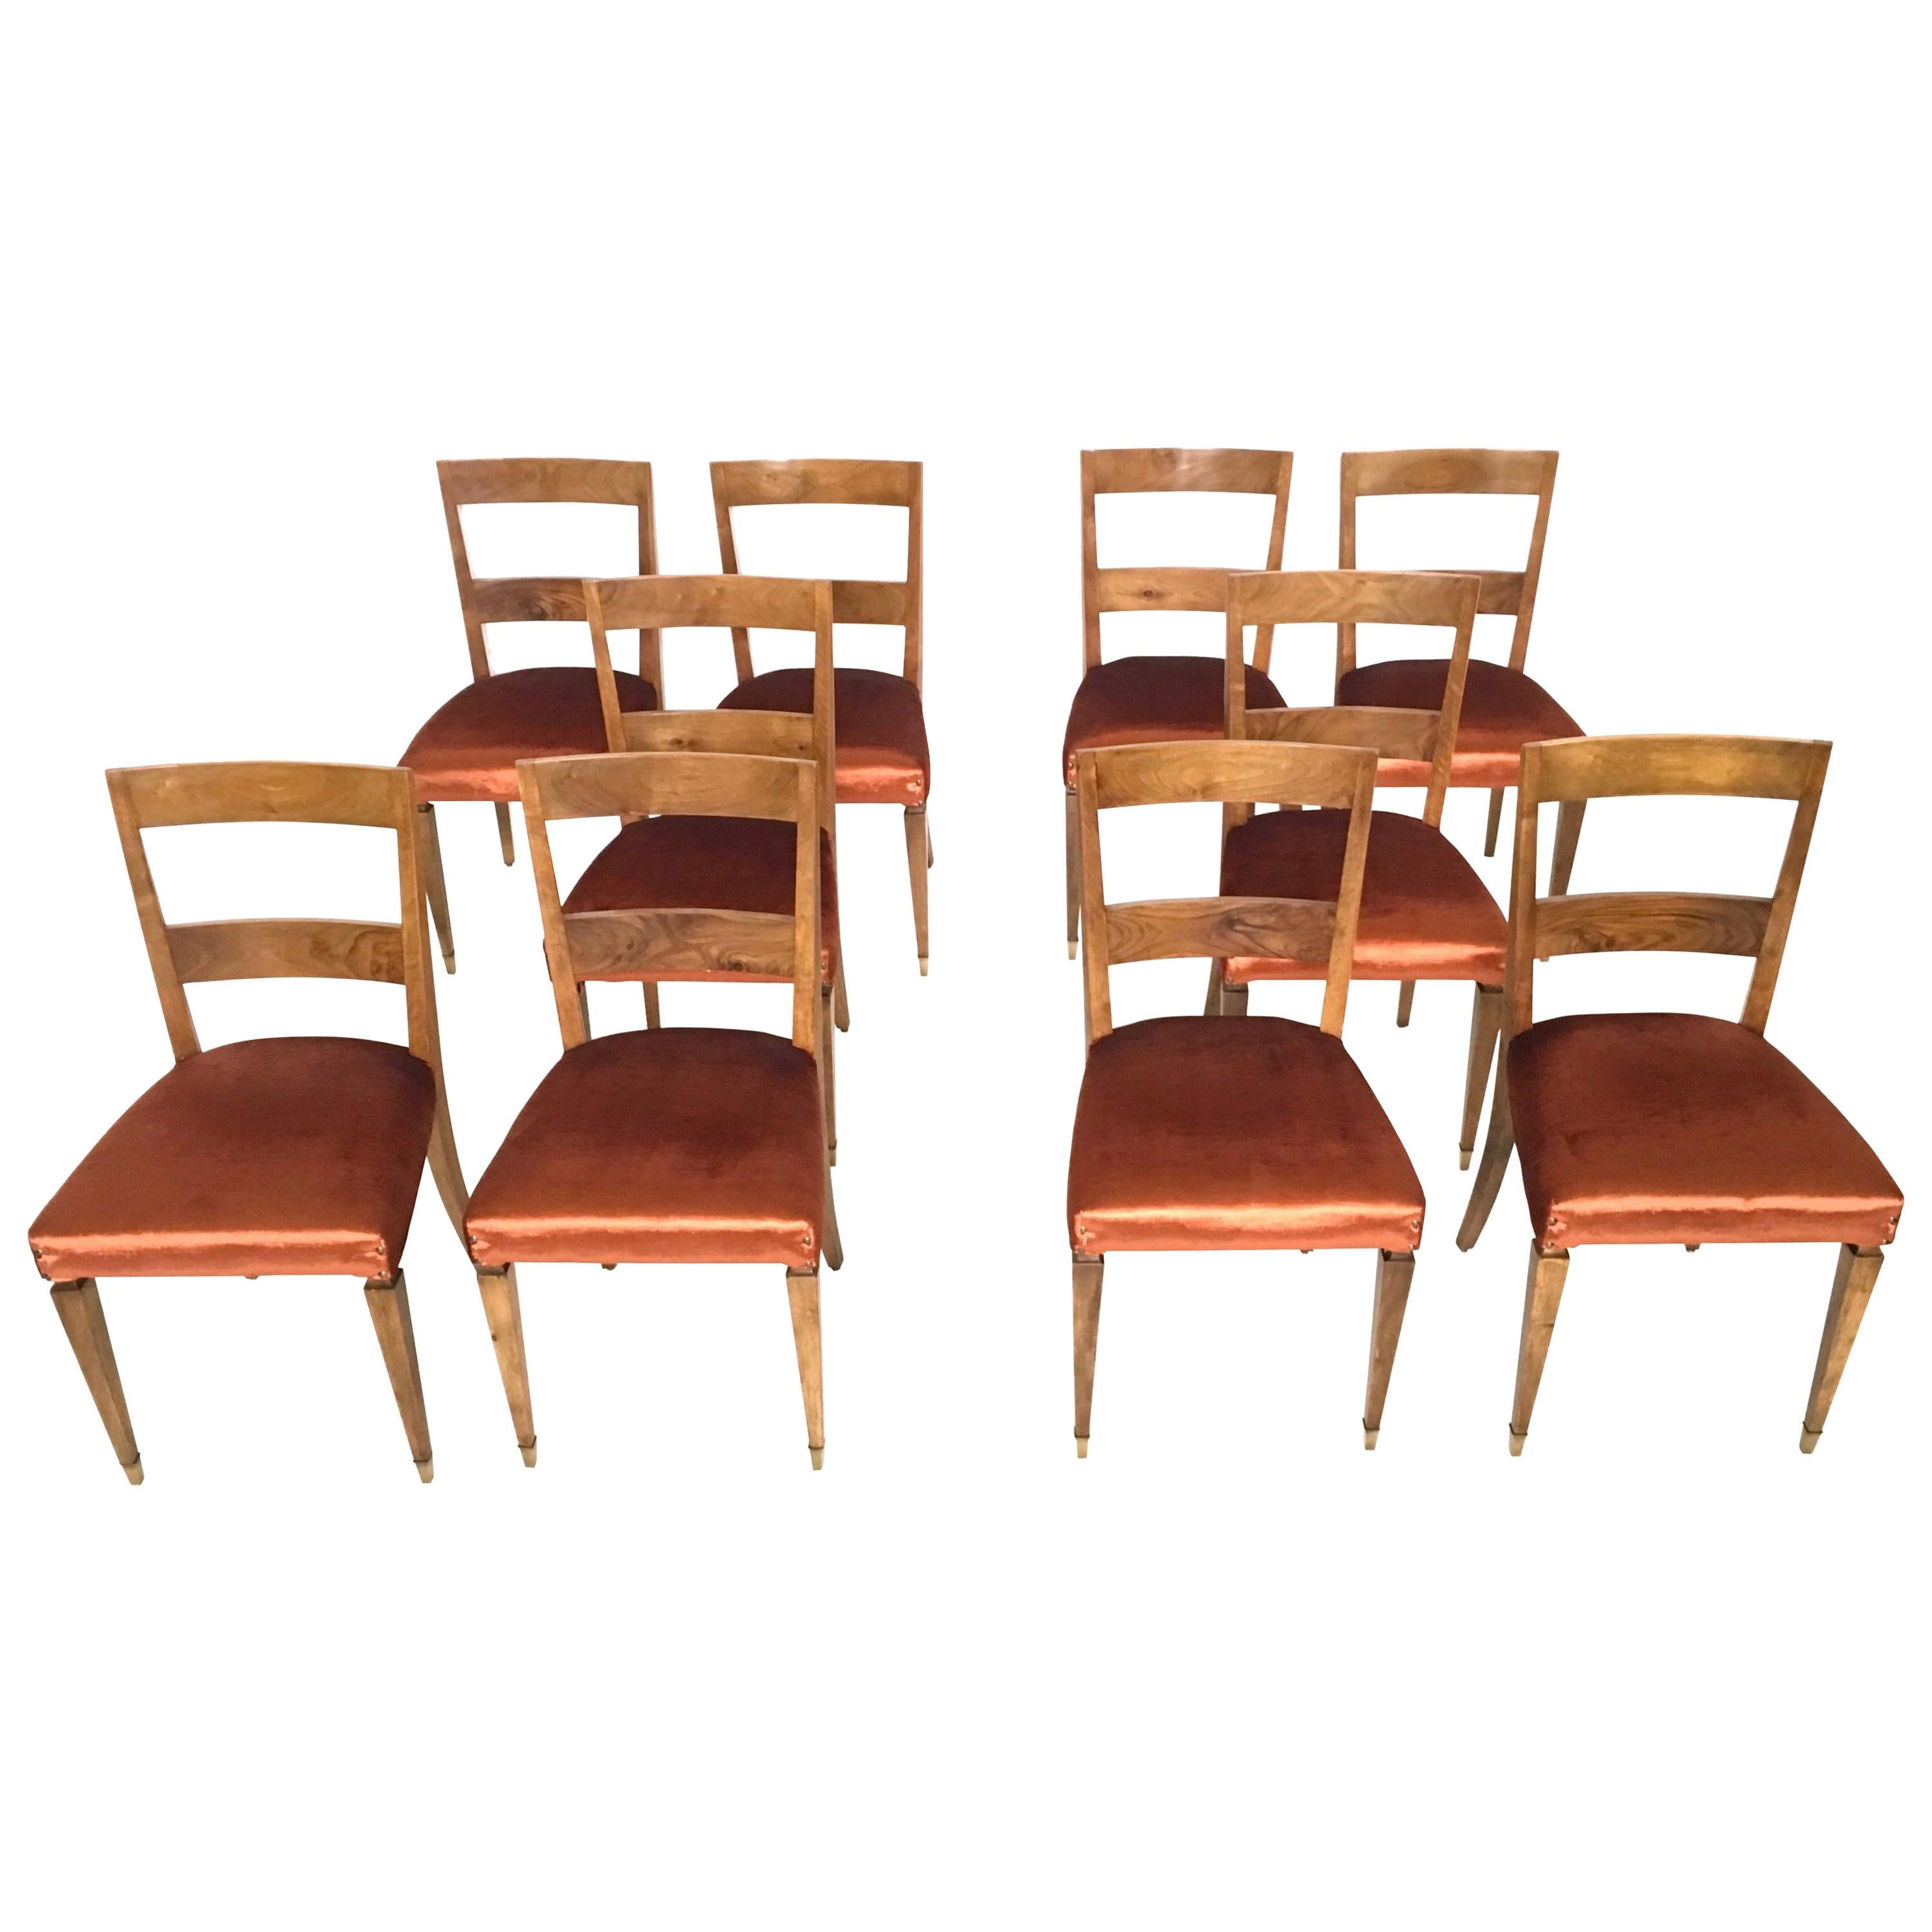 Set of Ten Vintage Walnut Dining Chairs with Orange Fabric Upholstery, Italy